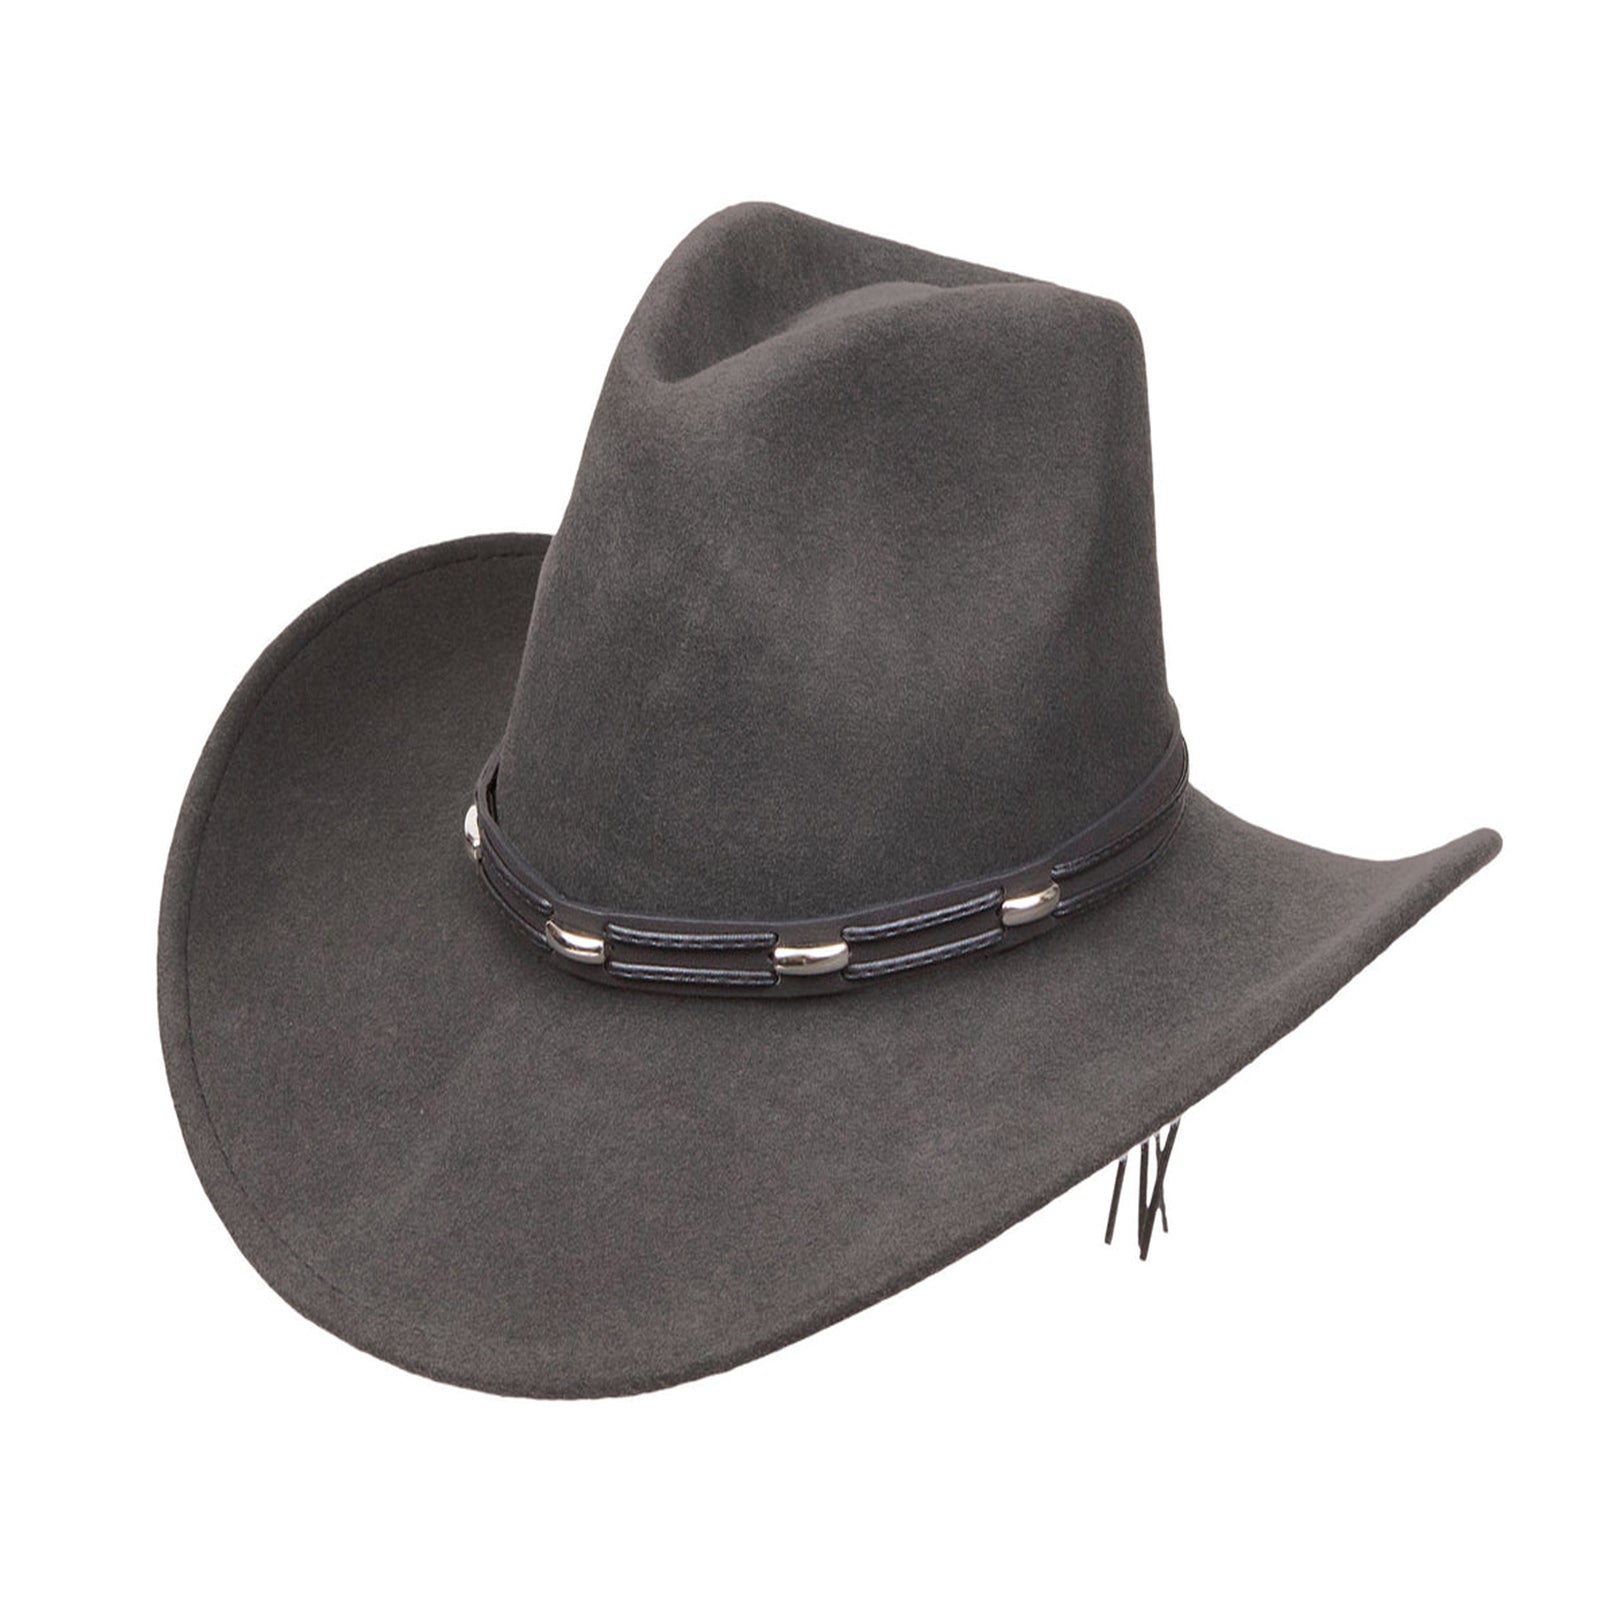 Grey Wool Felt Outback Western Cowboy Hat with Faux Leather Band